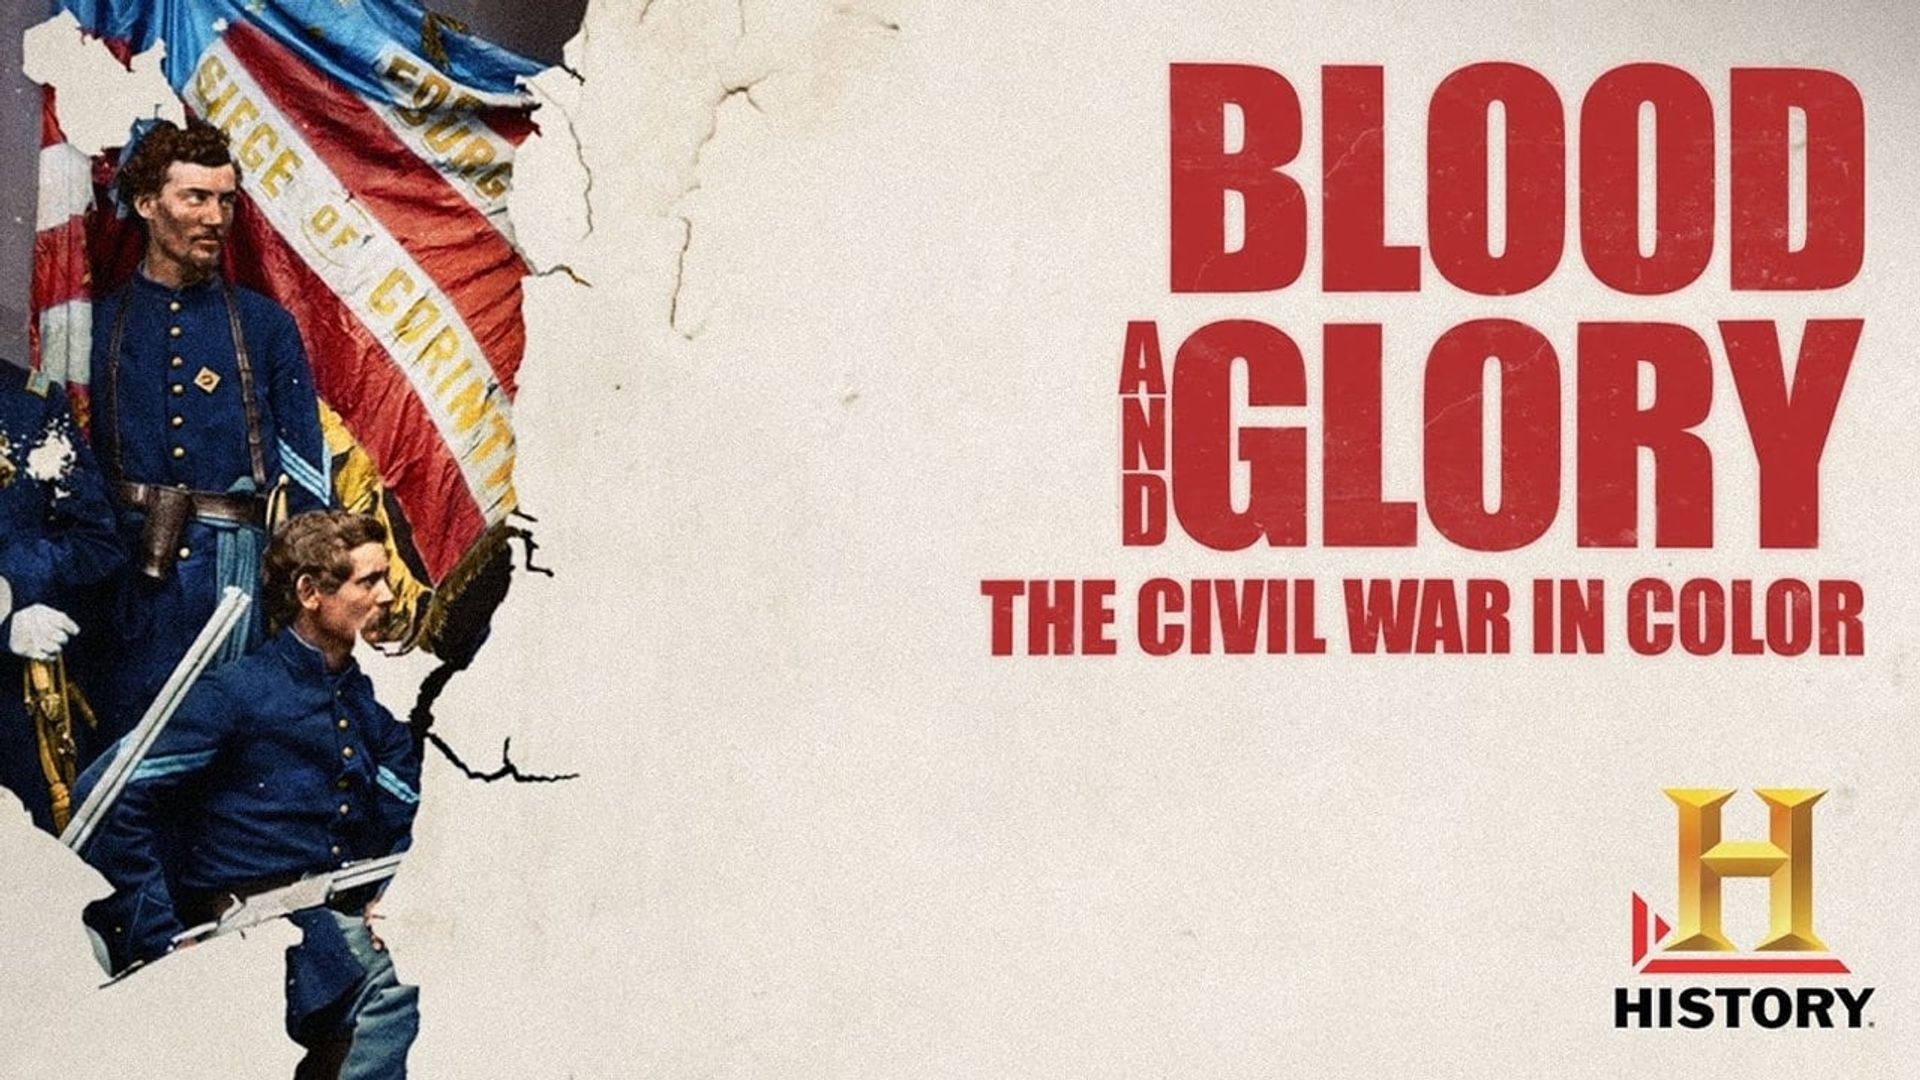 Blood and Glory: The Civil War in Color background